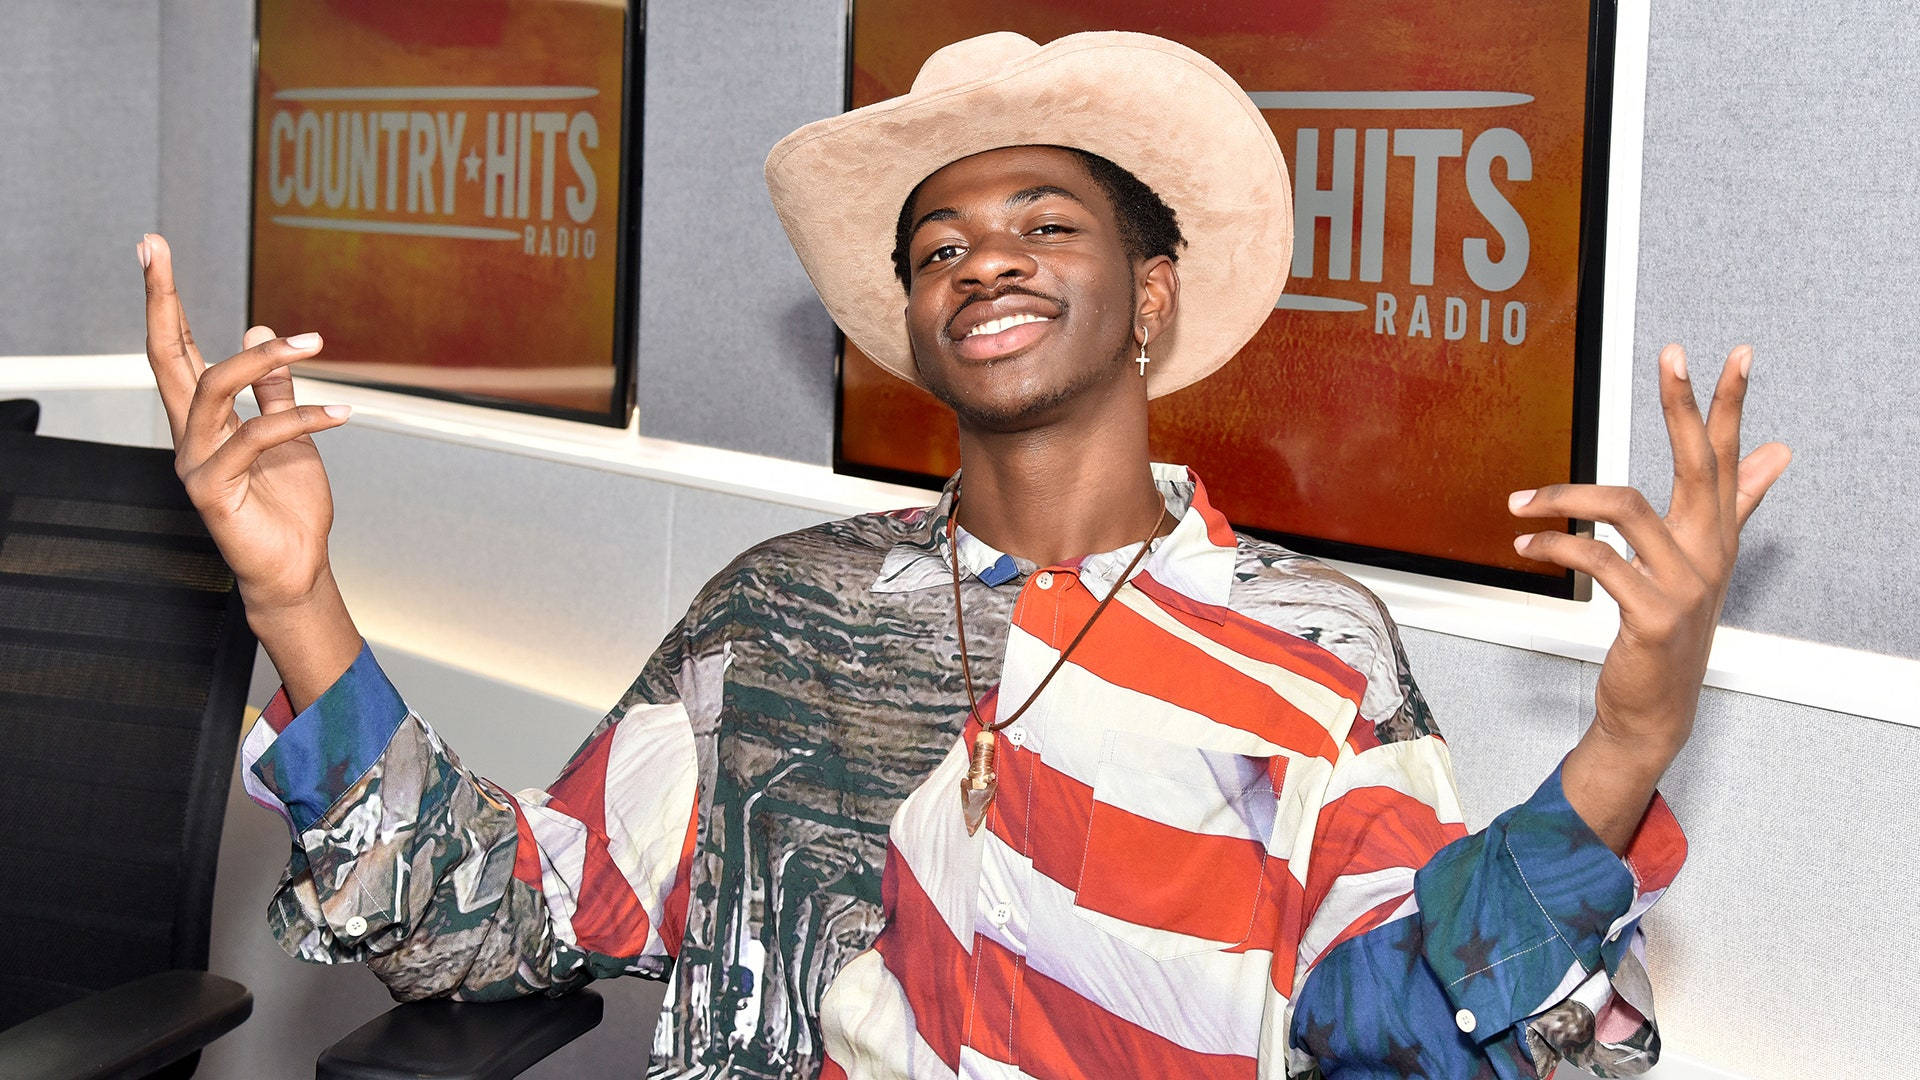 Lil Nas X Cowboy Striped Outfit Background